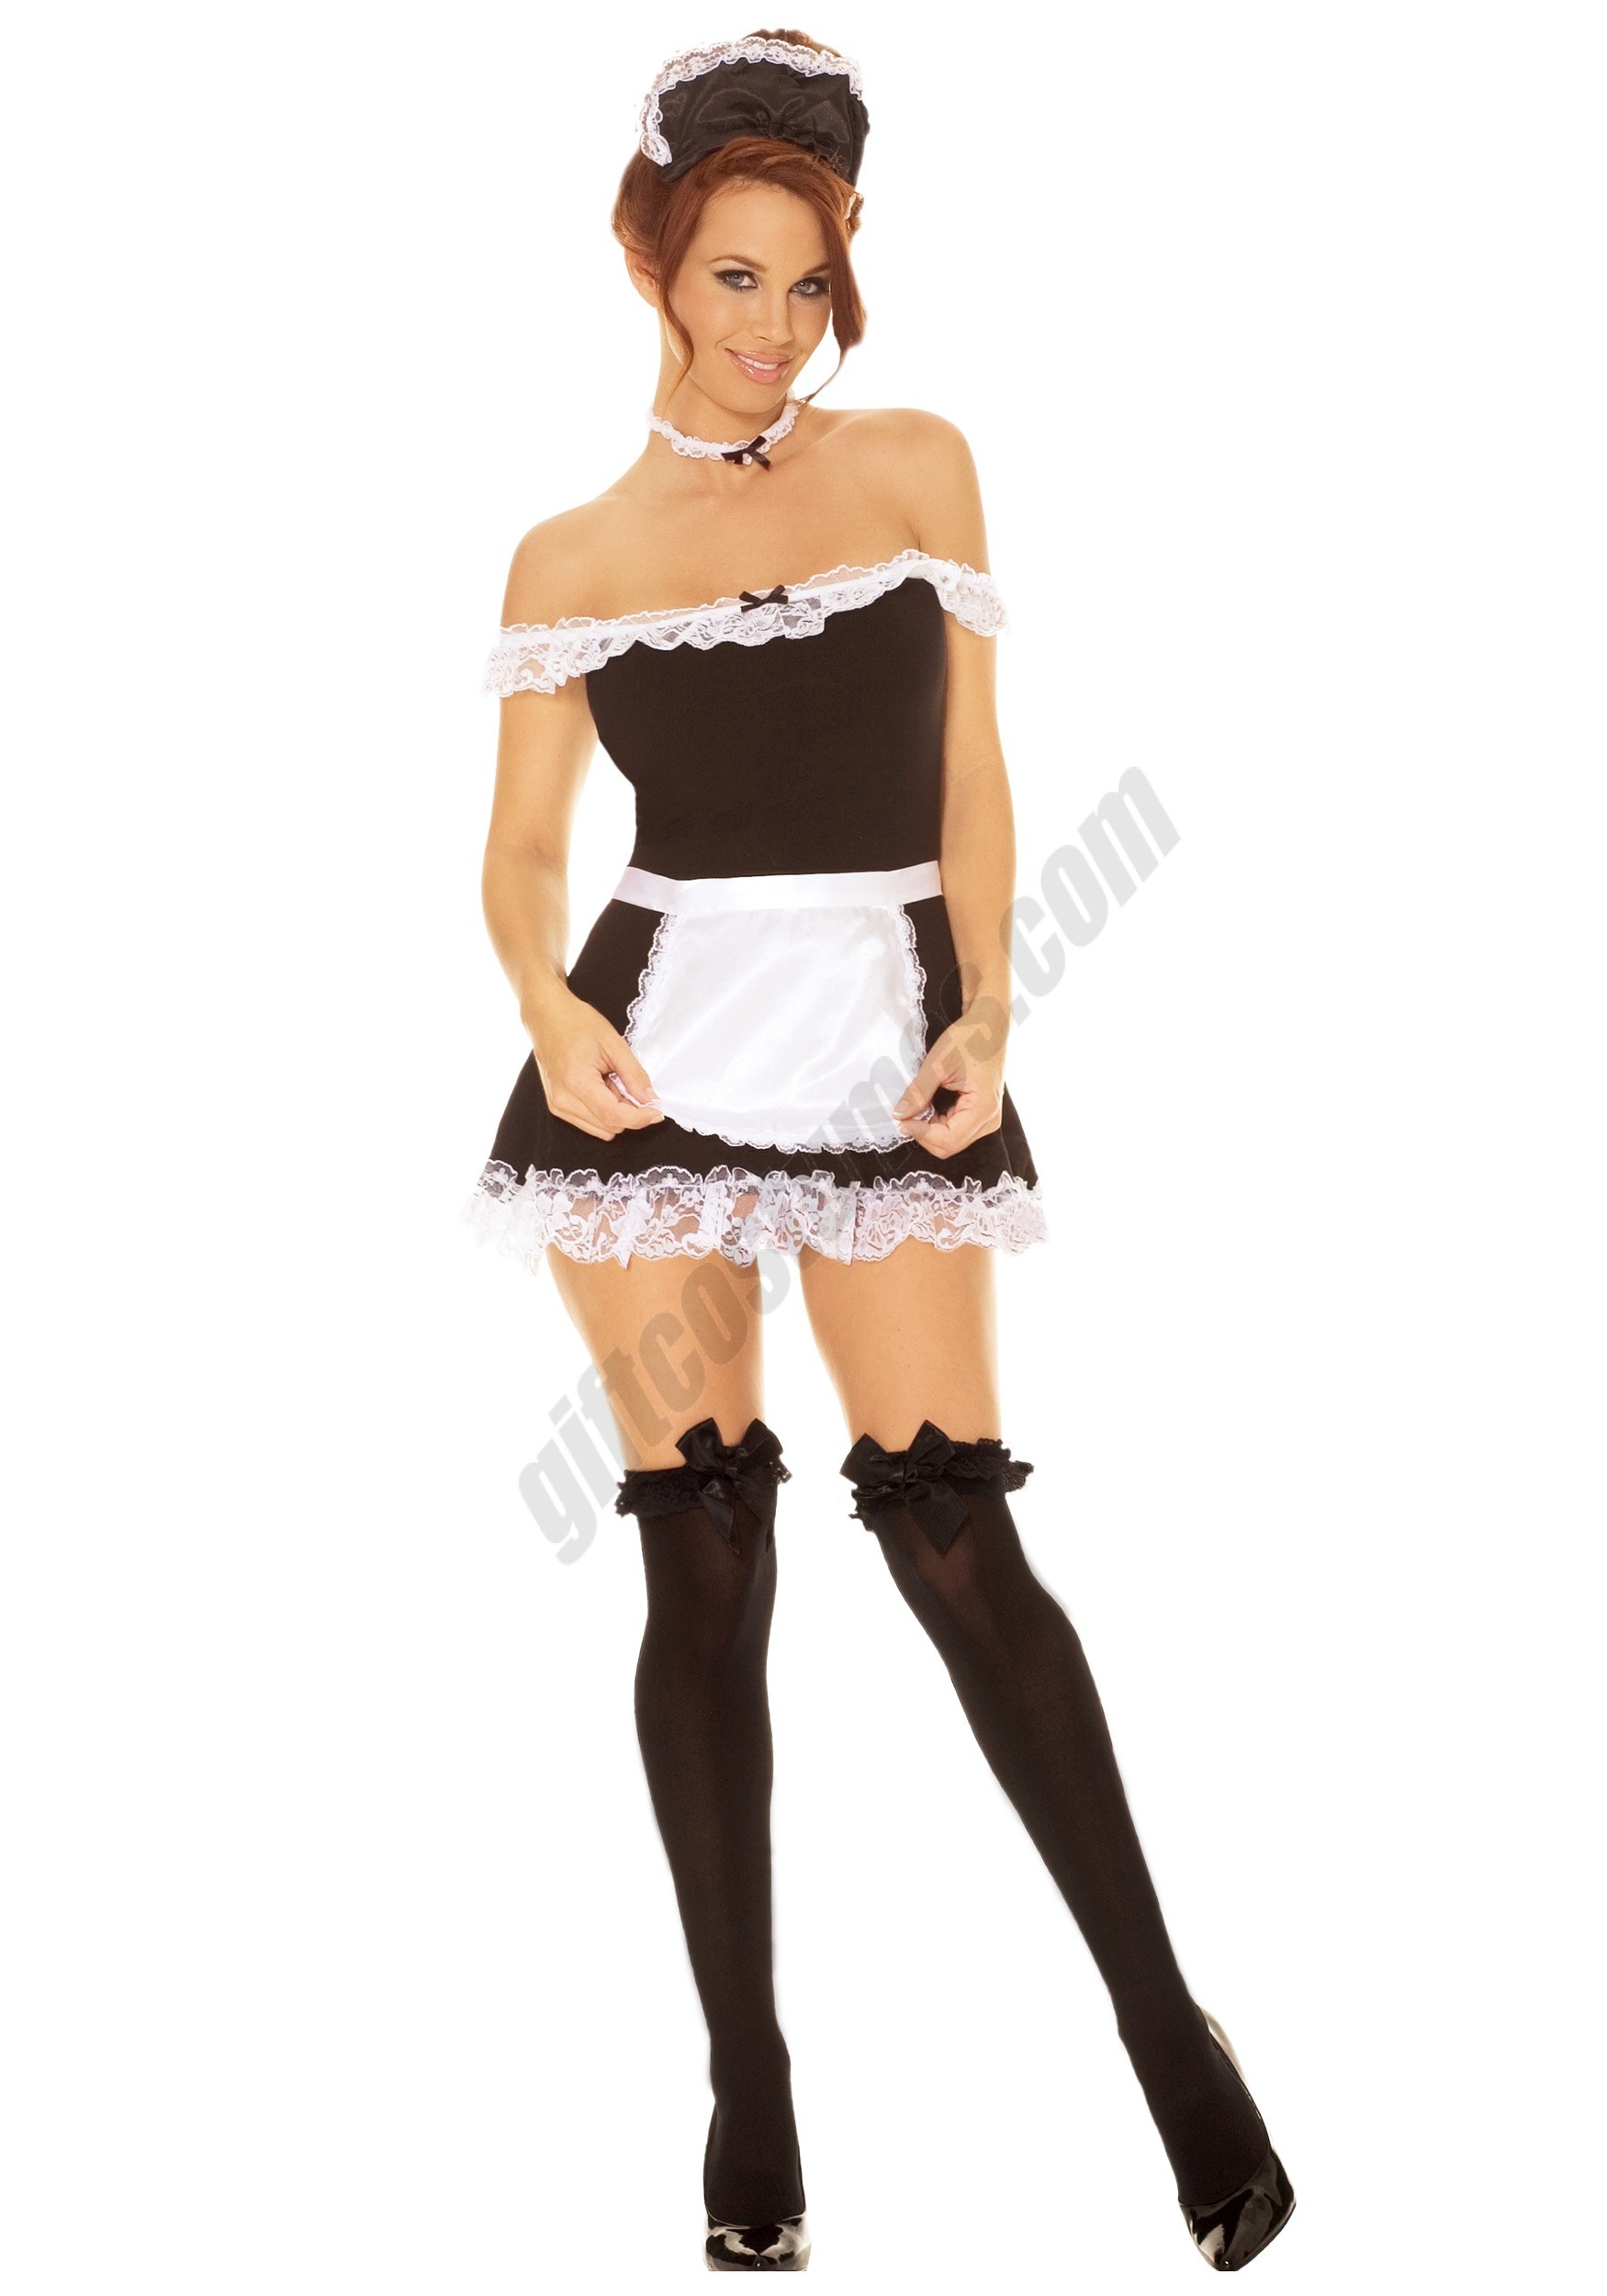 Sexy French Maid Costume - Women's - Sexy French Maid Costume - Women's